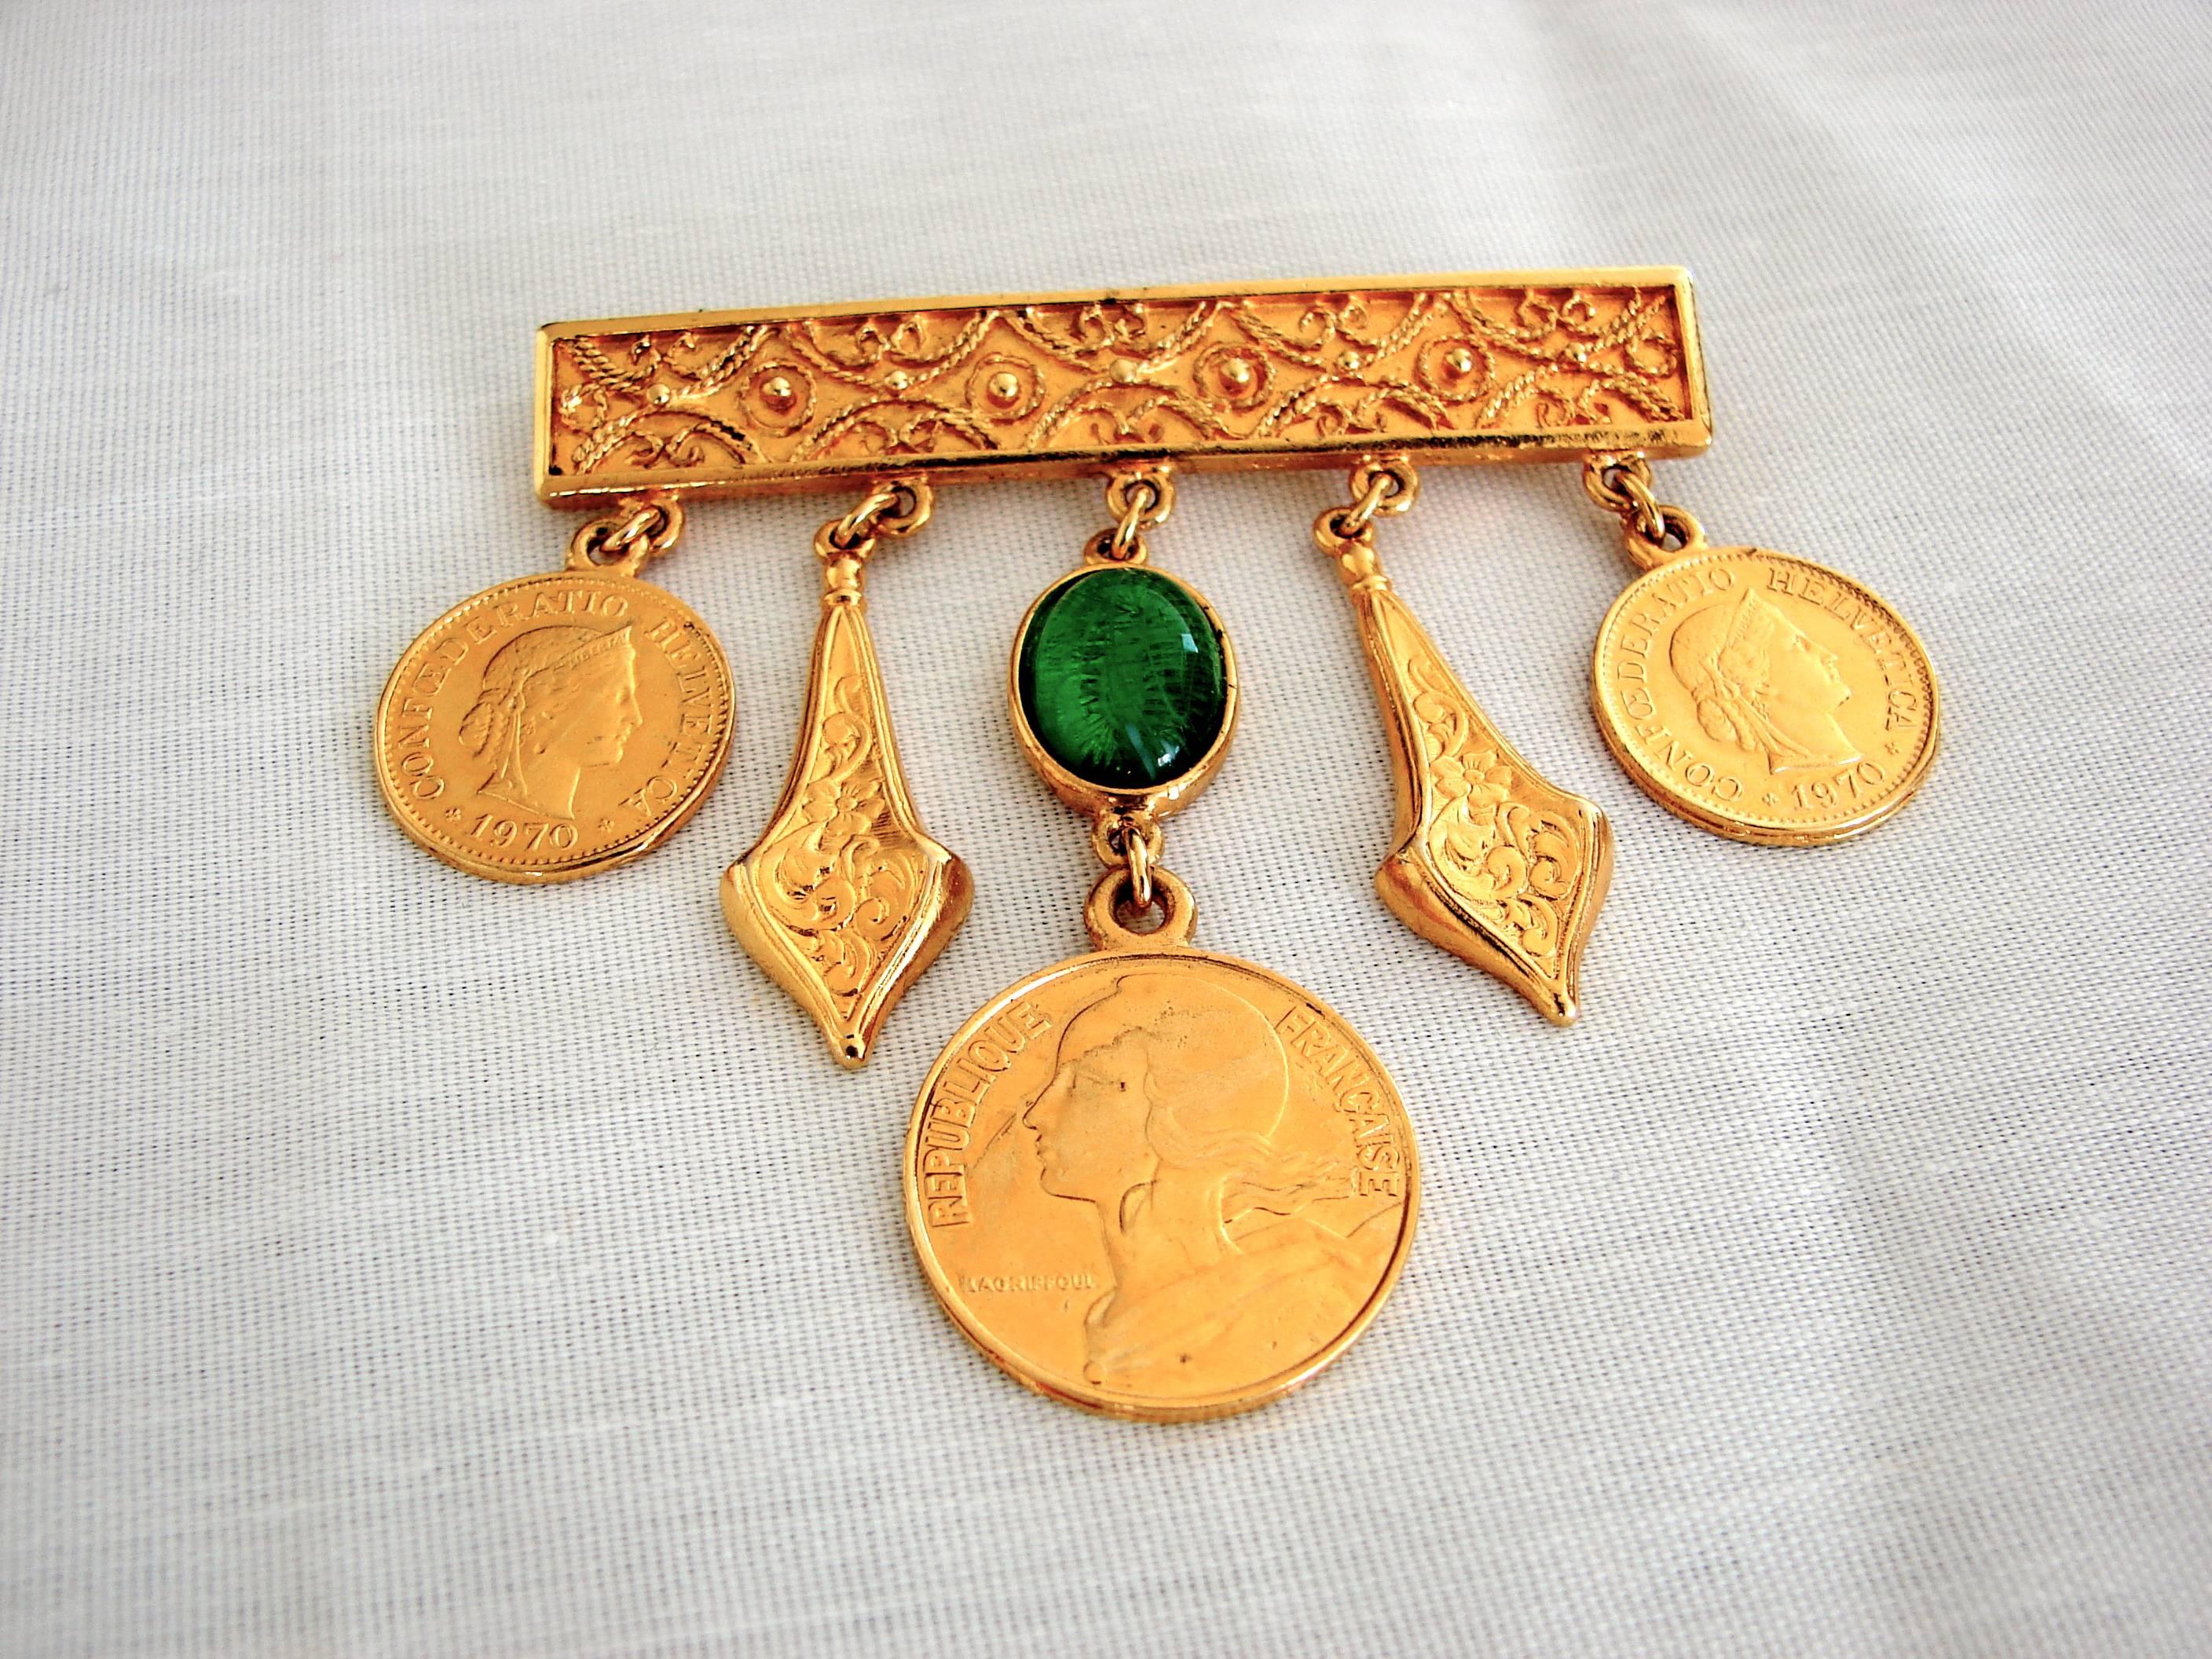 Women's Ben Amun Gold Bar Pin with Etruscan Charms Brooch 1980s 